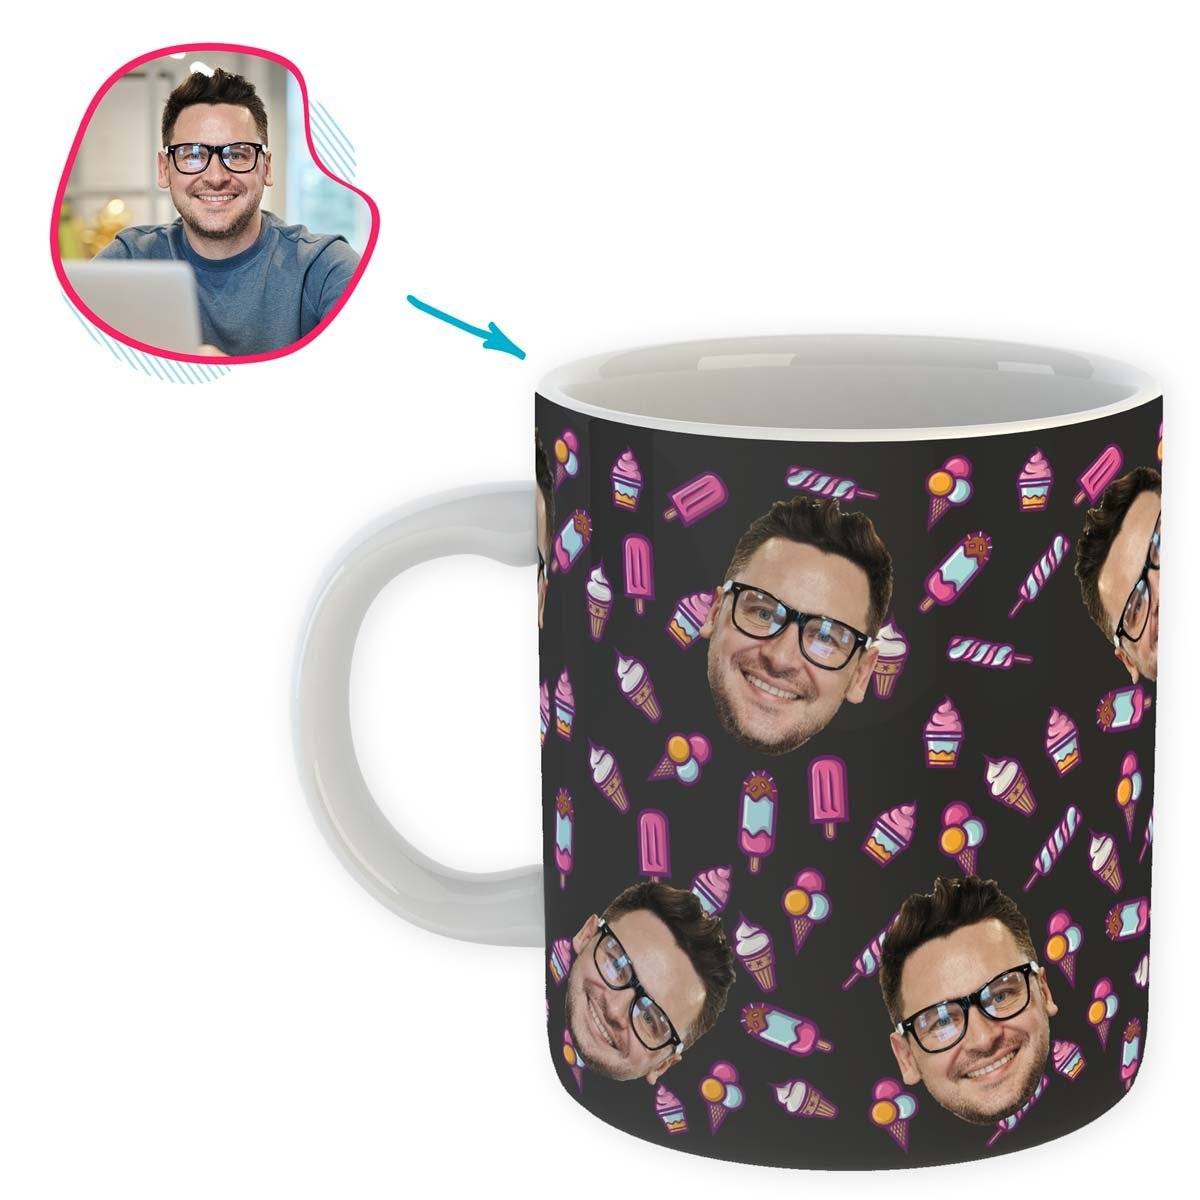 dark Candies mug personalized with photo of face printed on it